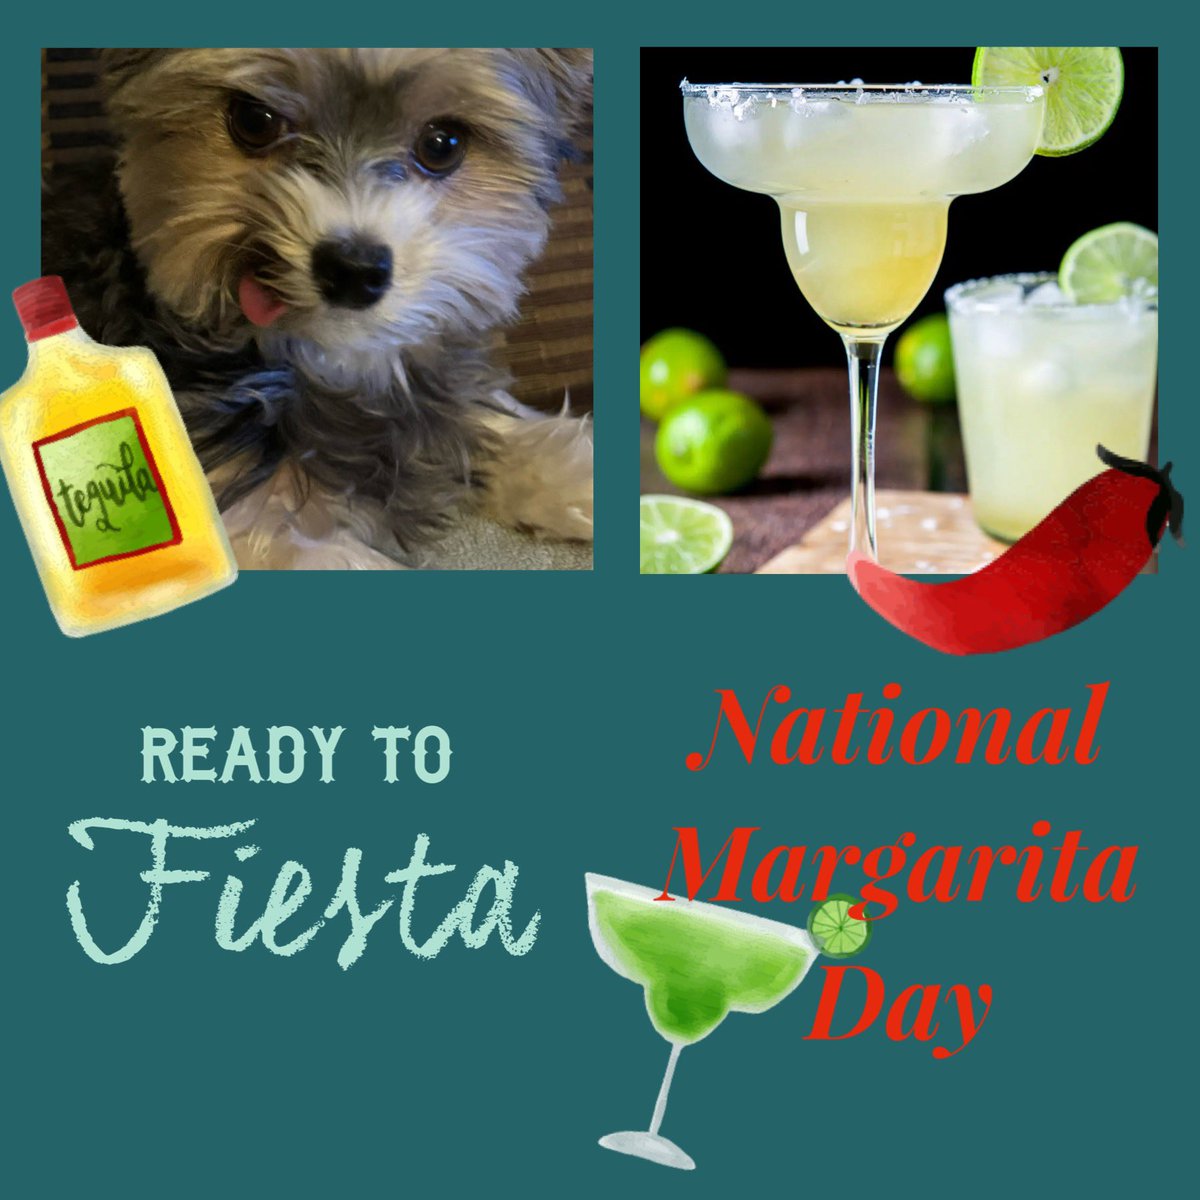 Gio. And we can’t forget National Margarita Day! 🥴Mom celebrated this one a few weeks ago in Cabo lol 😂 #MargaritaDay 🐾🫶🏼😵‍💫